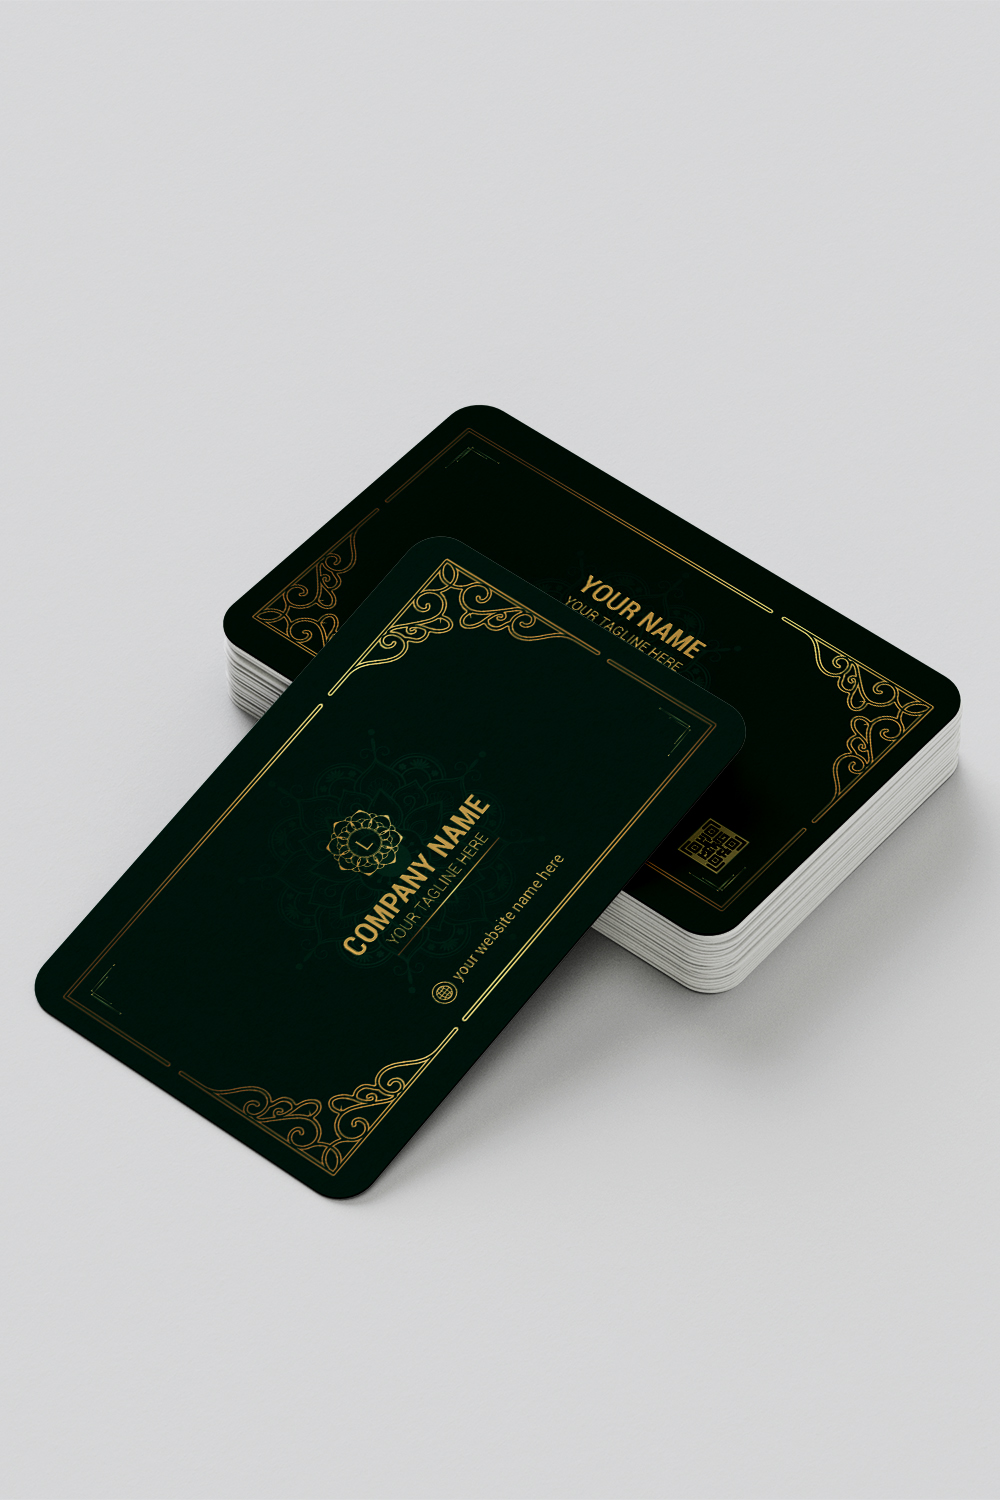 luxury mandala design with gold border green color corporate business card template pinterest preview image.